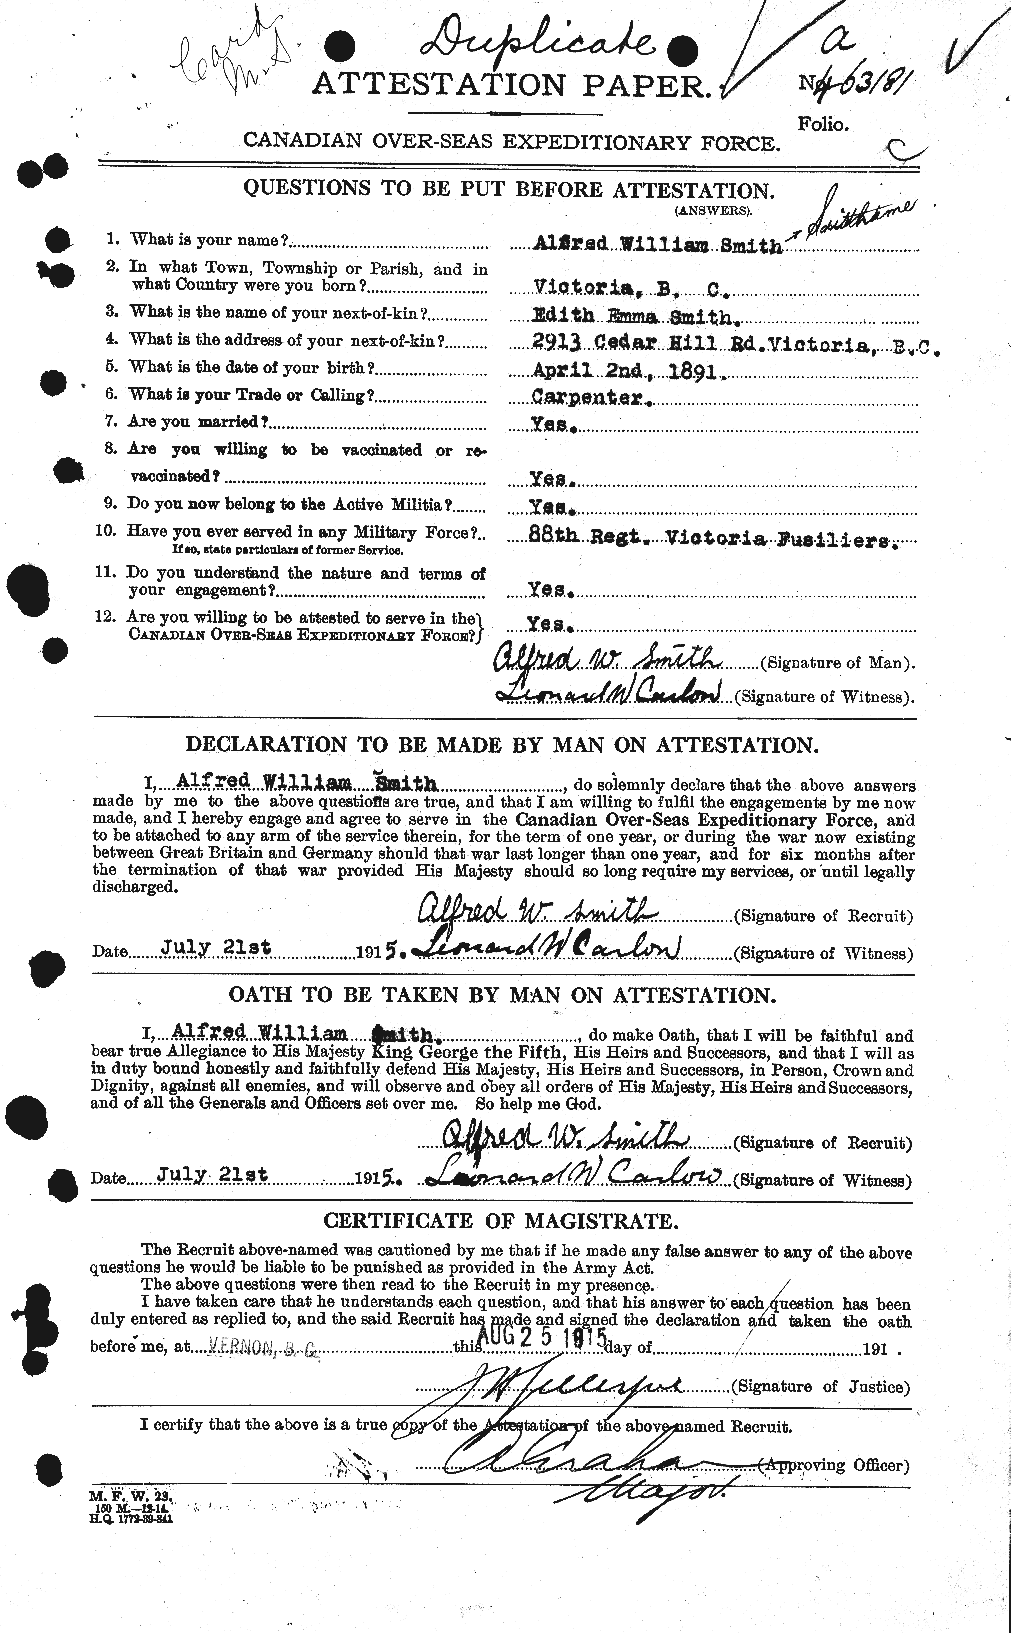 Personnel Records of the First World War - CEF 097692a